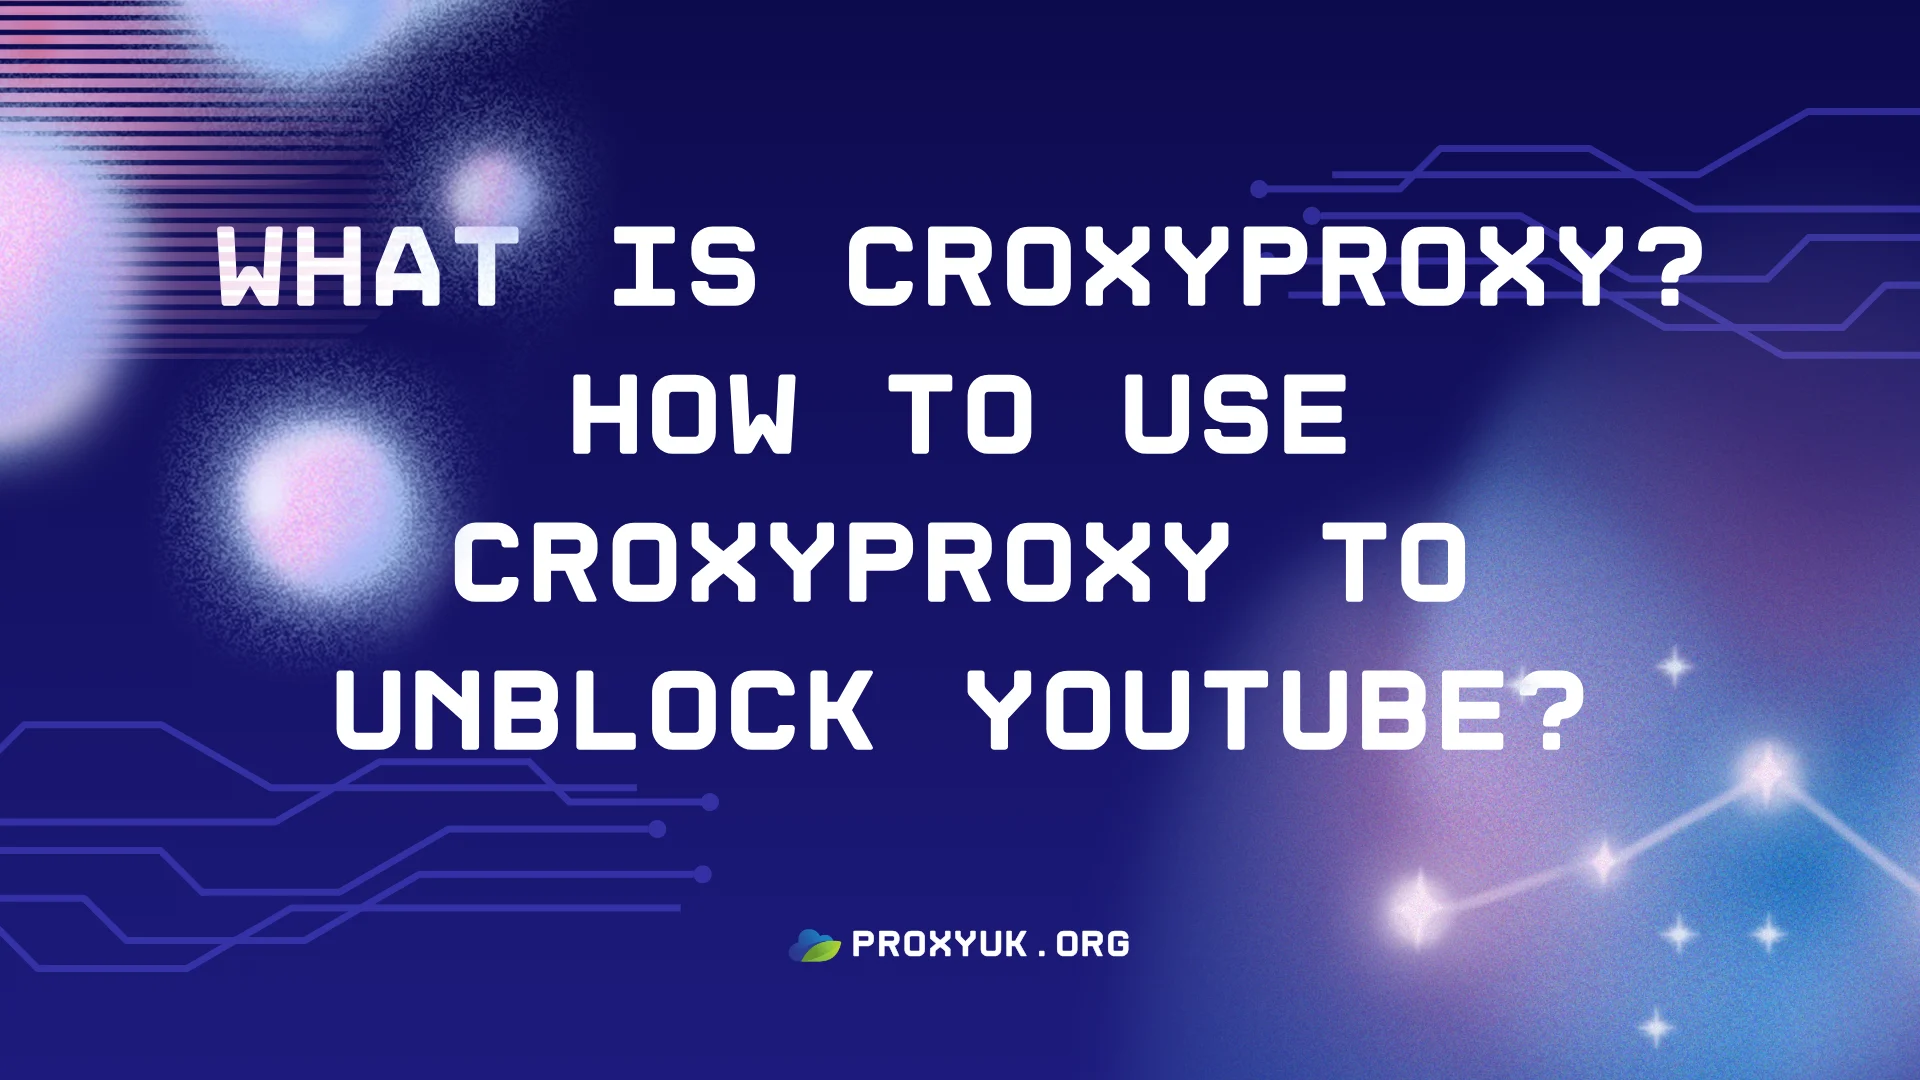 What is CroxyProxy? How to use CroxyProxy to unblock youtube?